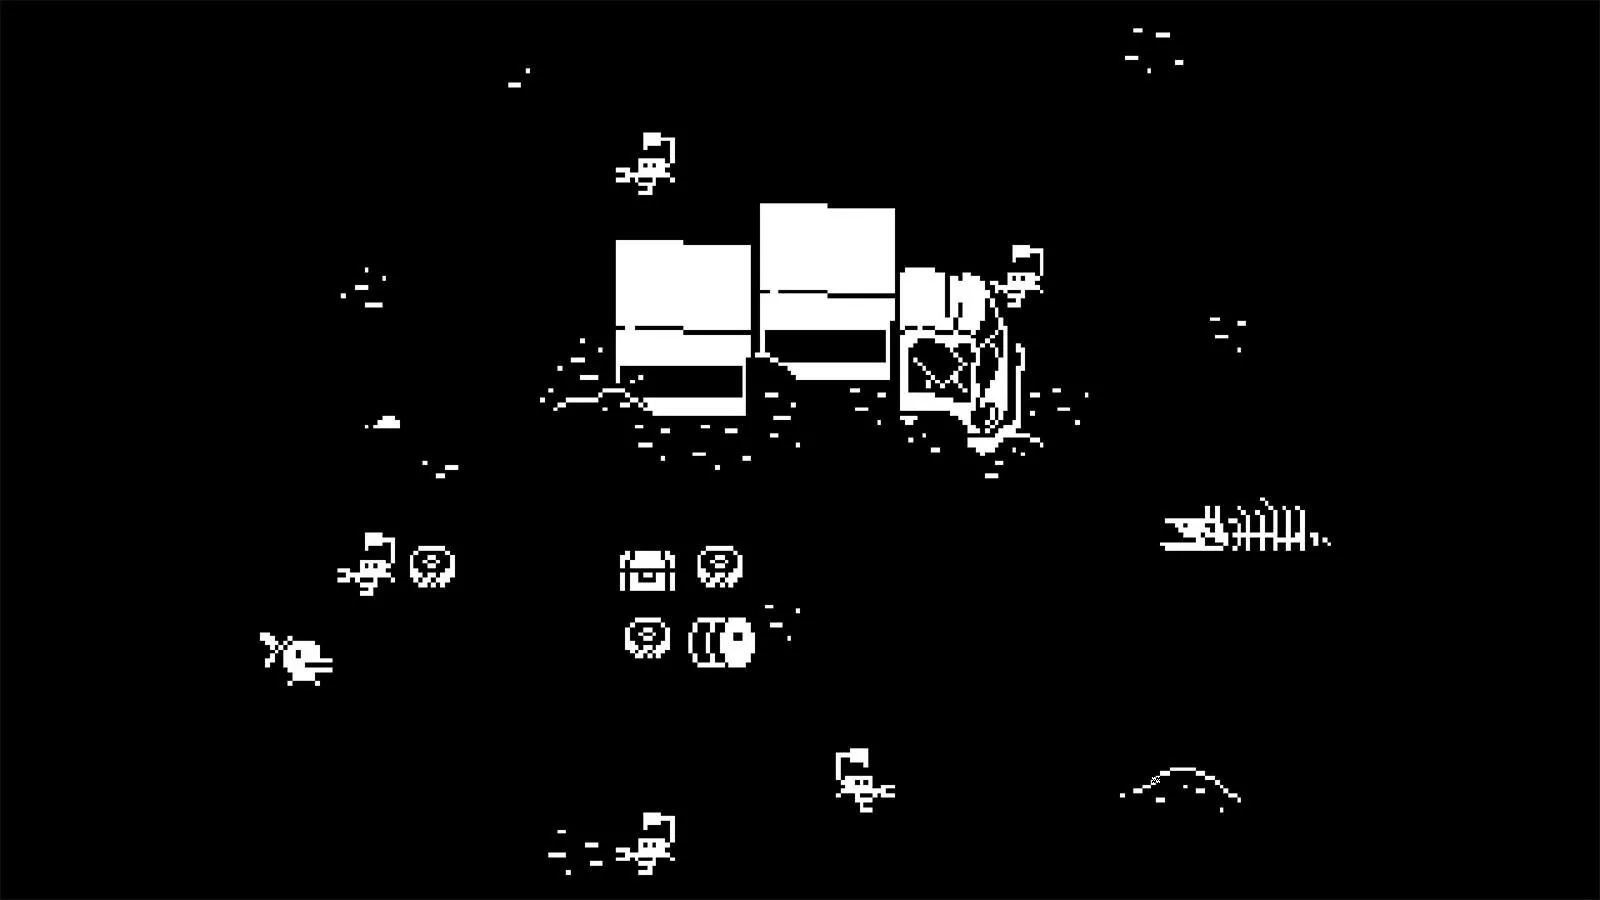 A small circular creature weilding a sword walking through a black-and-white environment with a large broken-down truck.